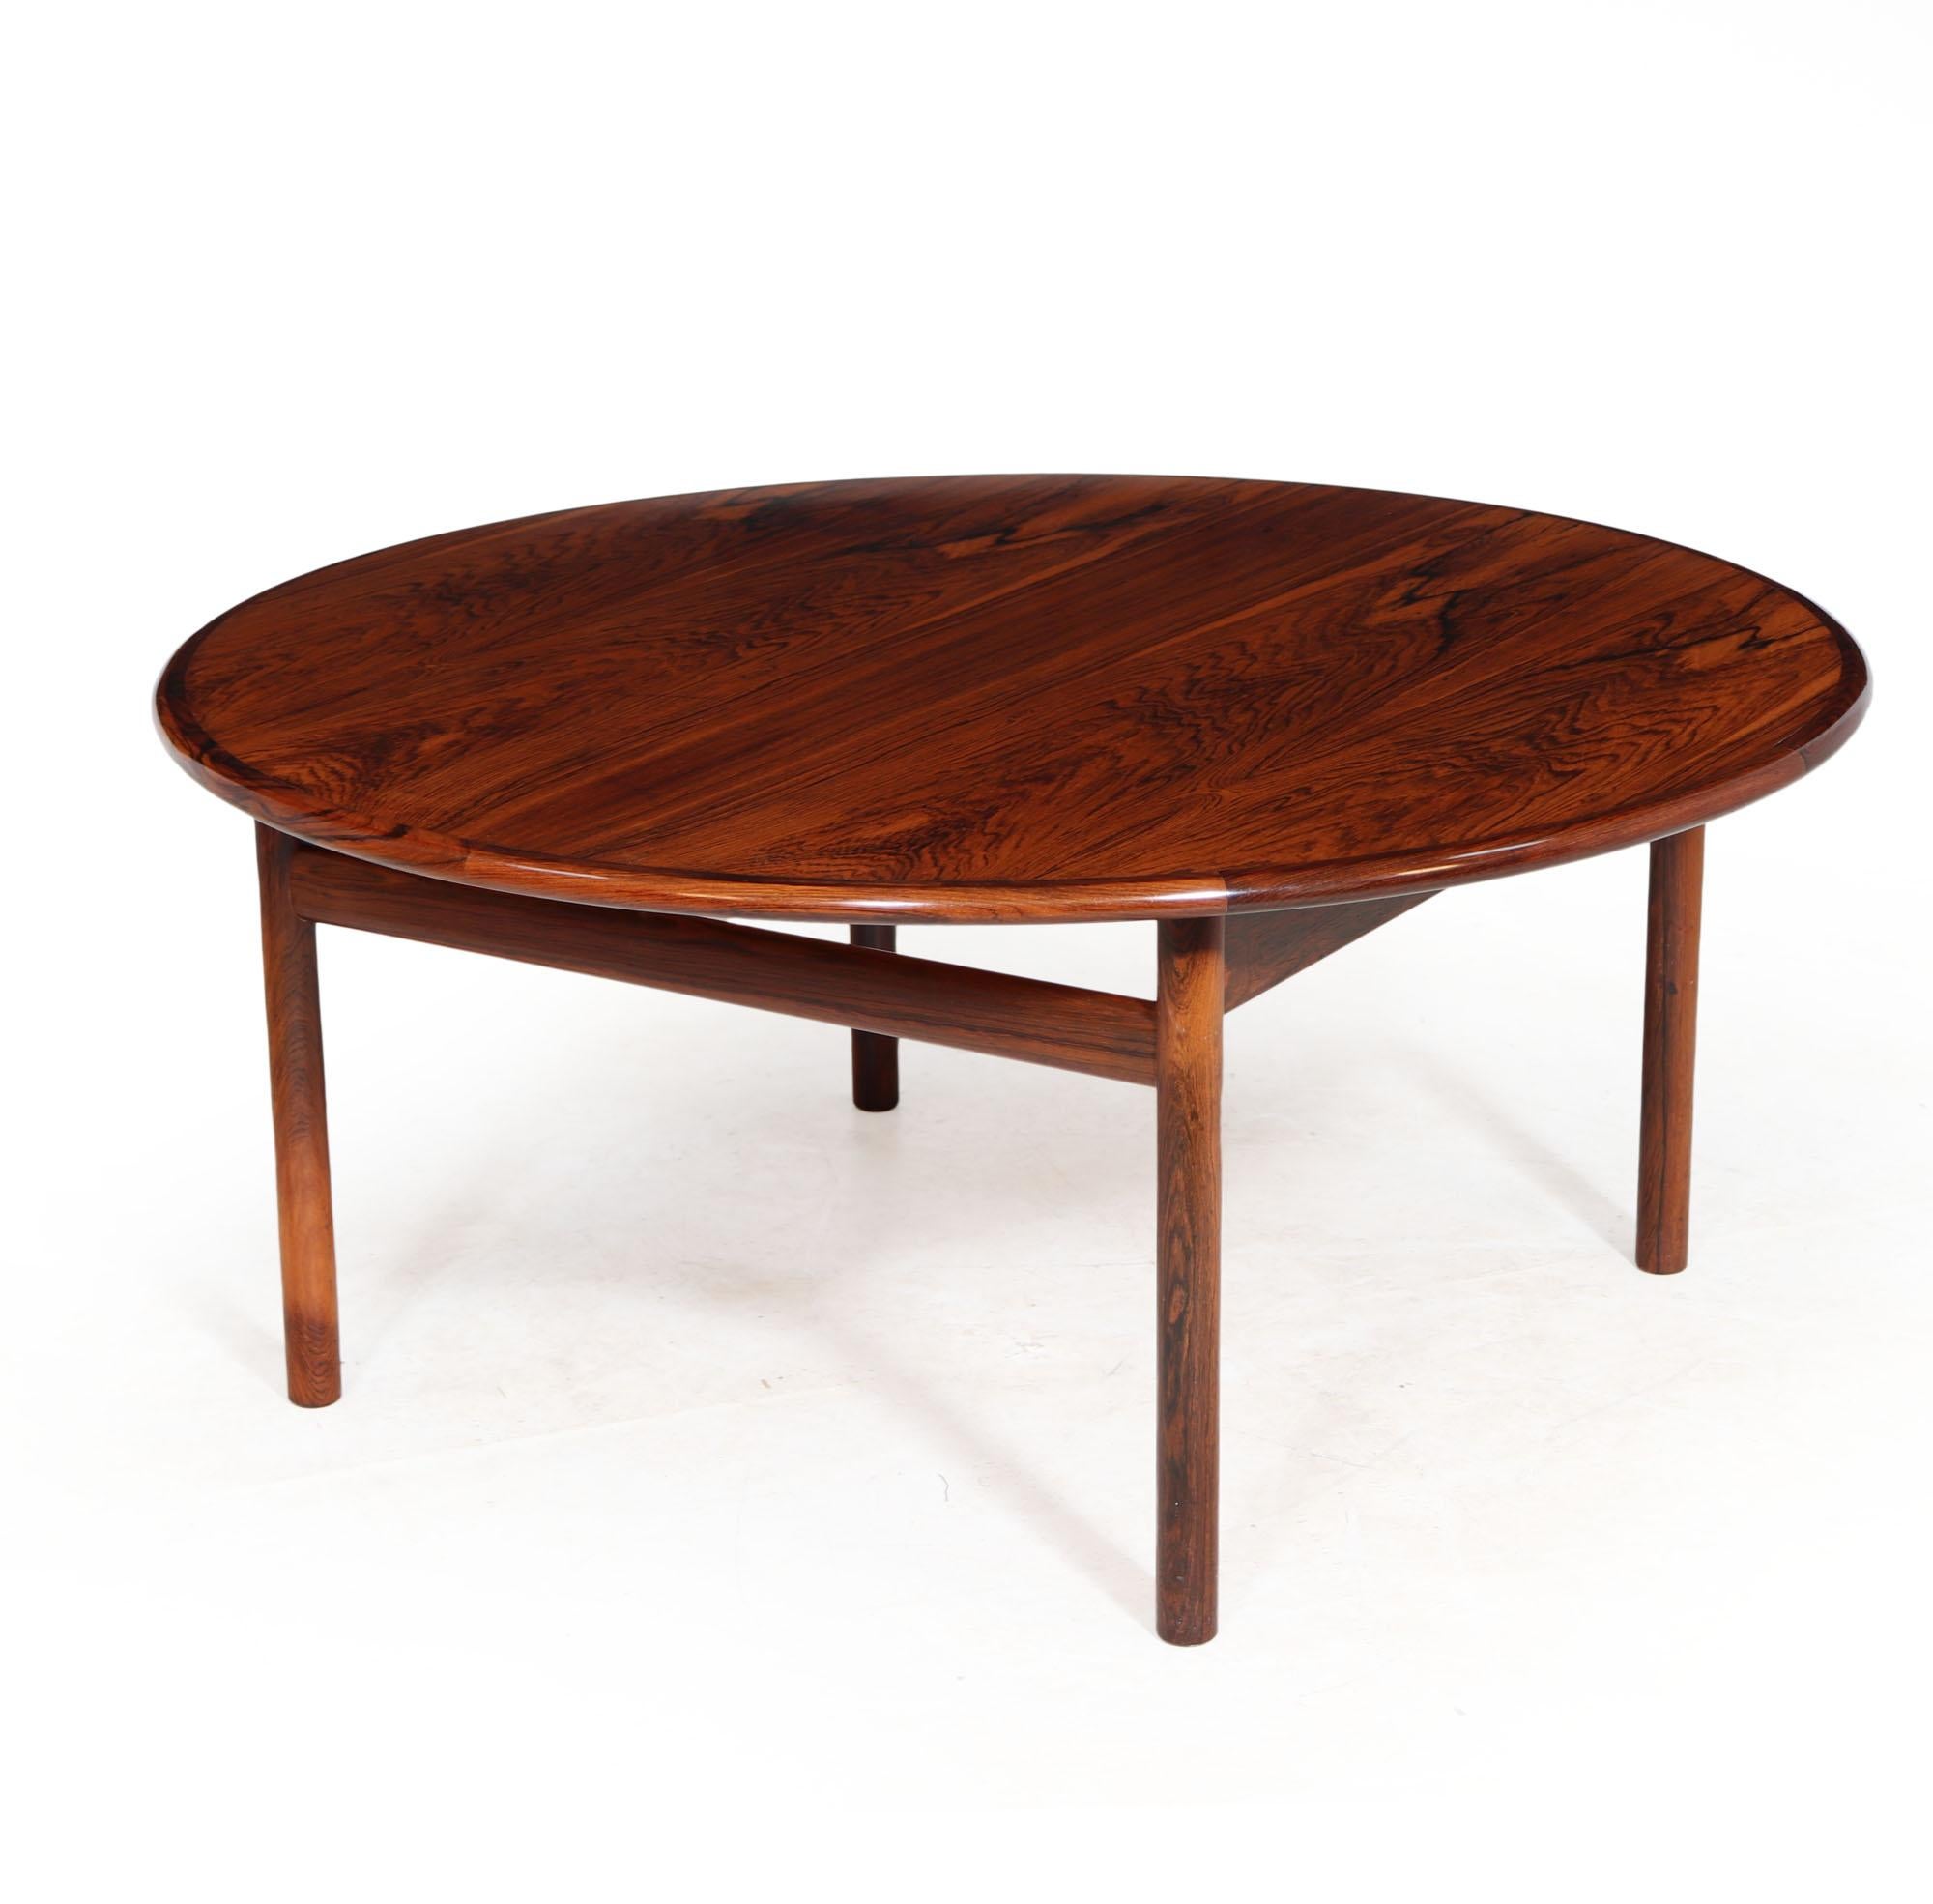 A Good quality Danish design coffee table in rosewood with solid edging and four legged base with structural supports, lovely graining to the wood, in excellent condition throughout having been carefully restored and fully hand polished

 

Age: